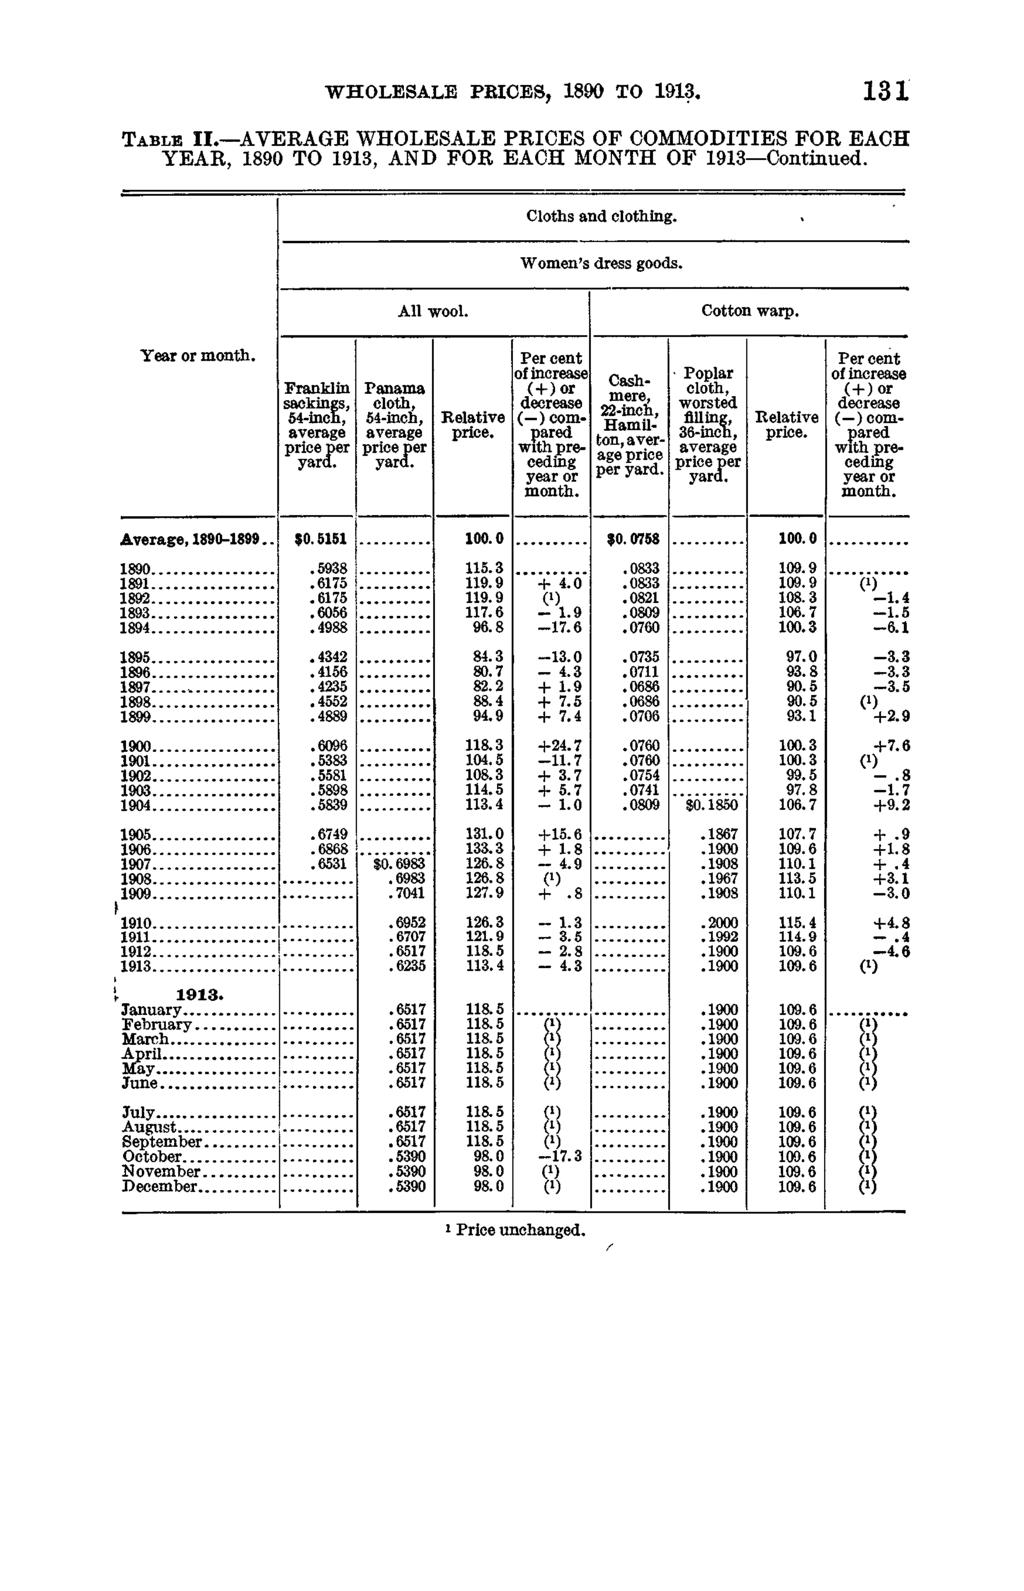 WHOLESALE PBICES, 1890 TO 1913. 131 T a b le II. AVERAGE WHOLESALE PRICES OF COMMODITIES FOR EACH YEAR, 1890 TO 1913, AND FOR EACH MONTH OF 1913 Continued. Cloths and clothing. Women s dress goods.